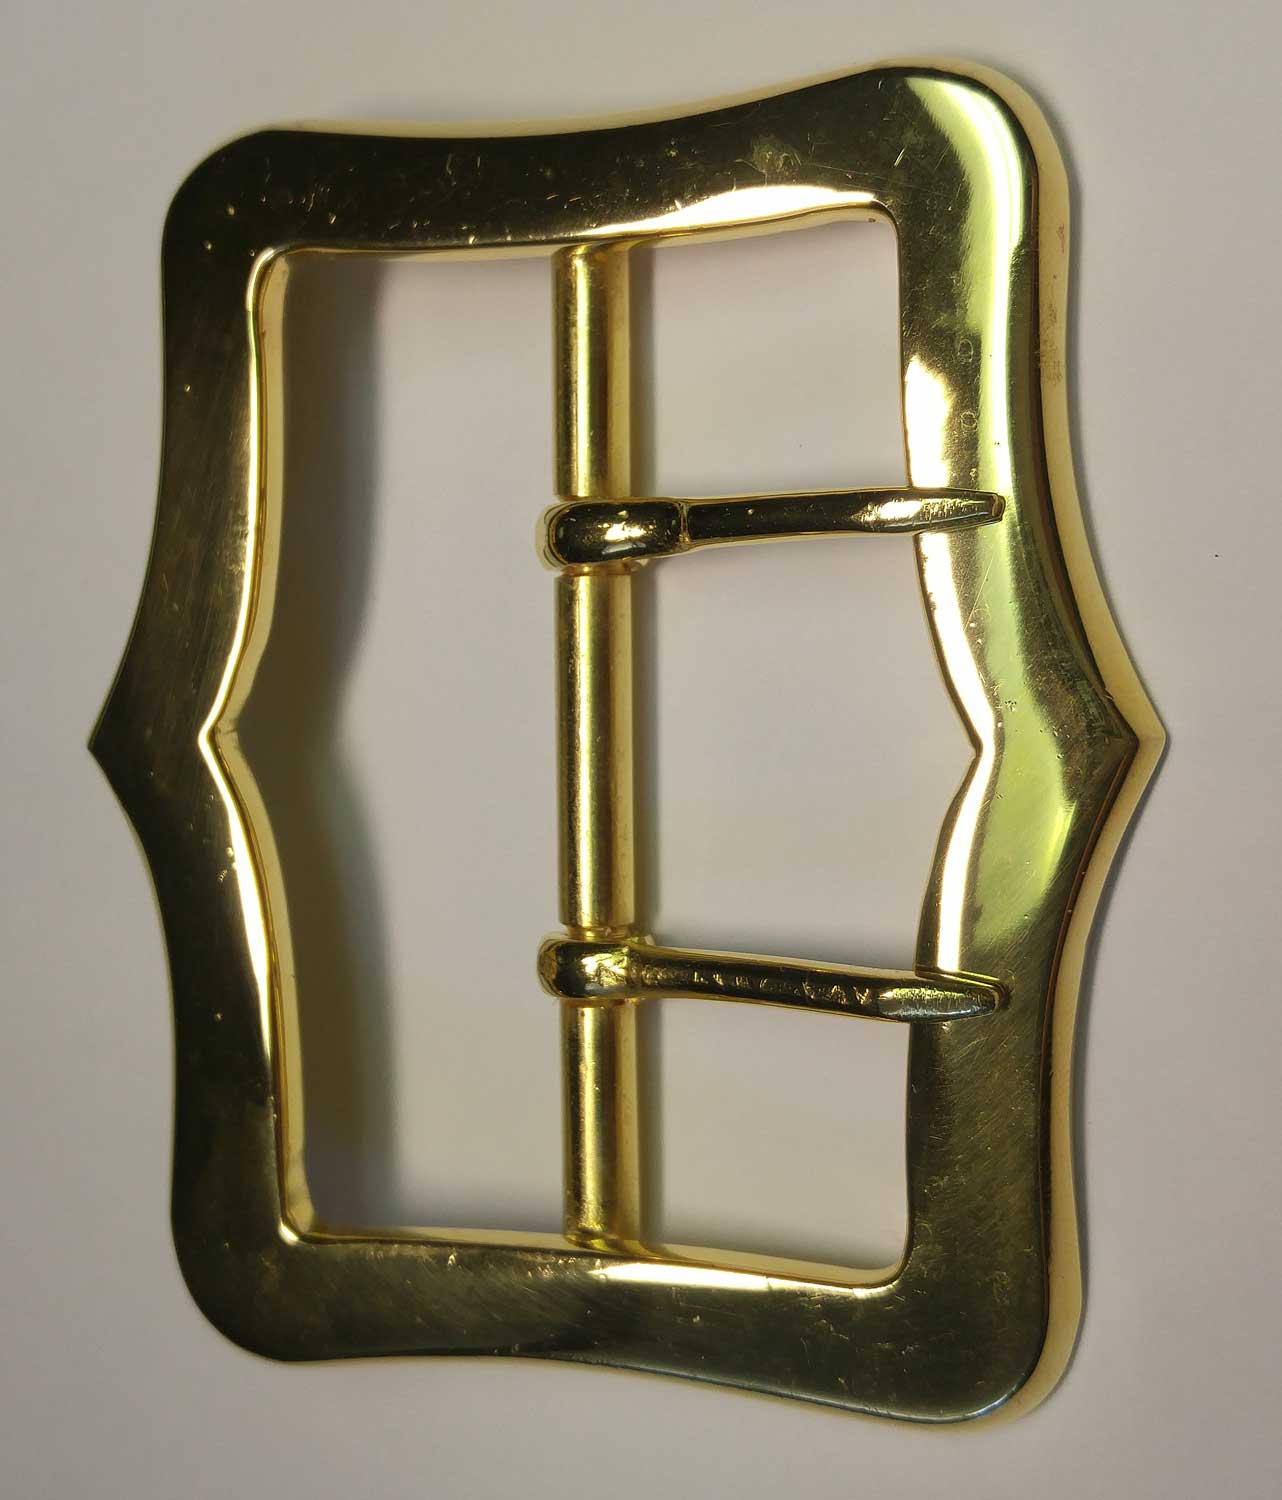 Buckle, Gold 63mm (2-1/2")